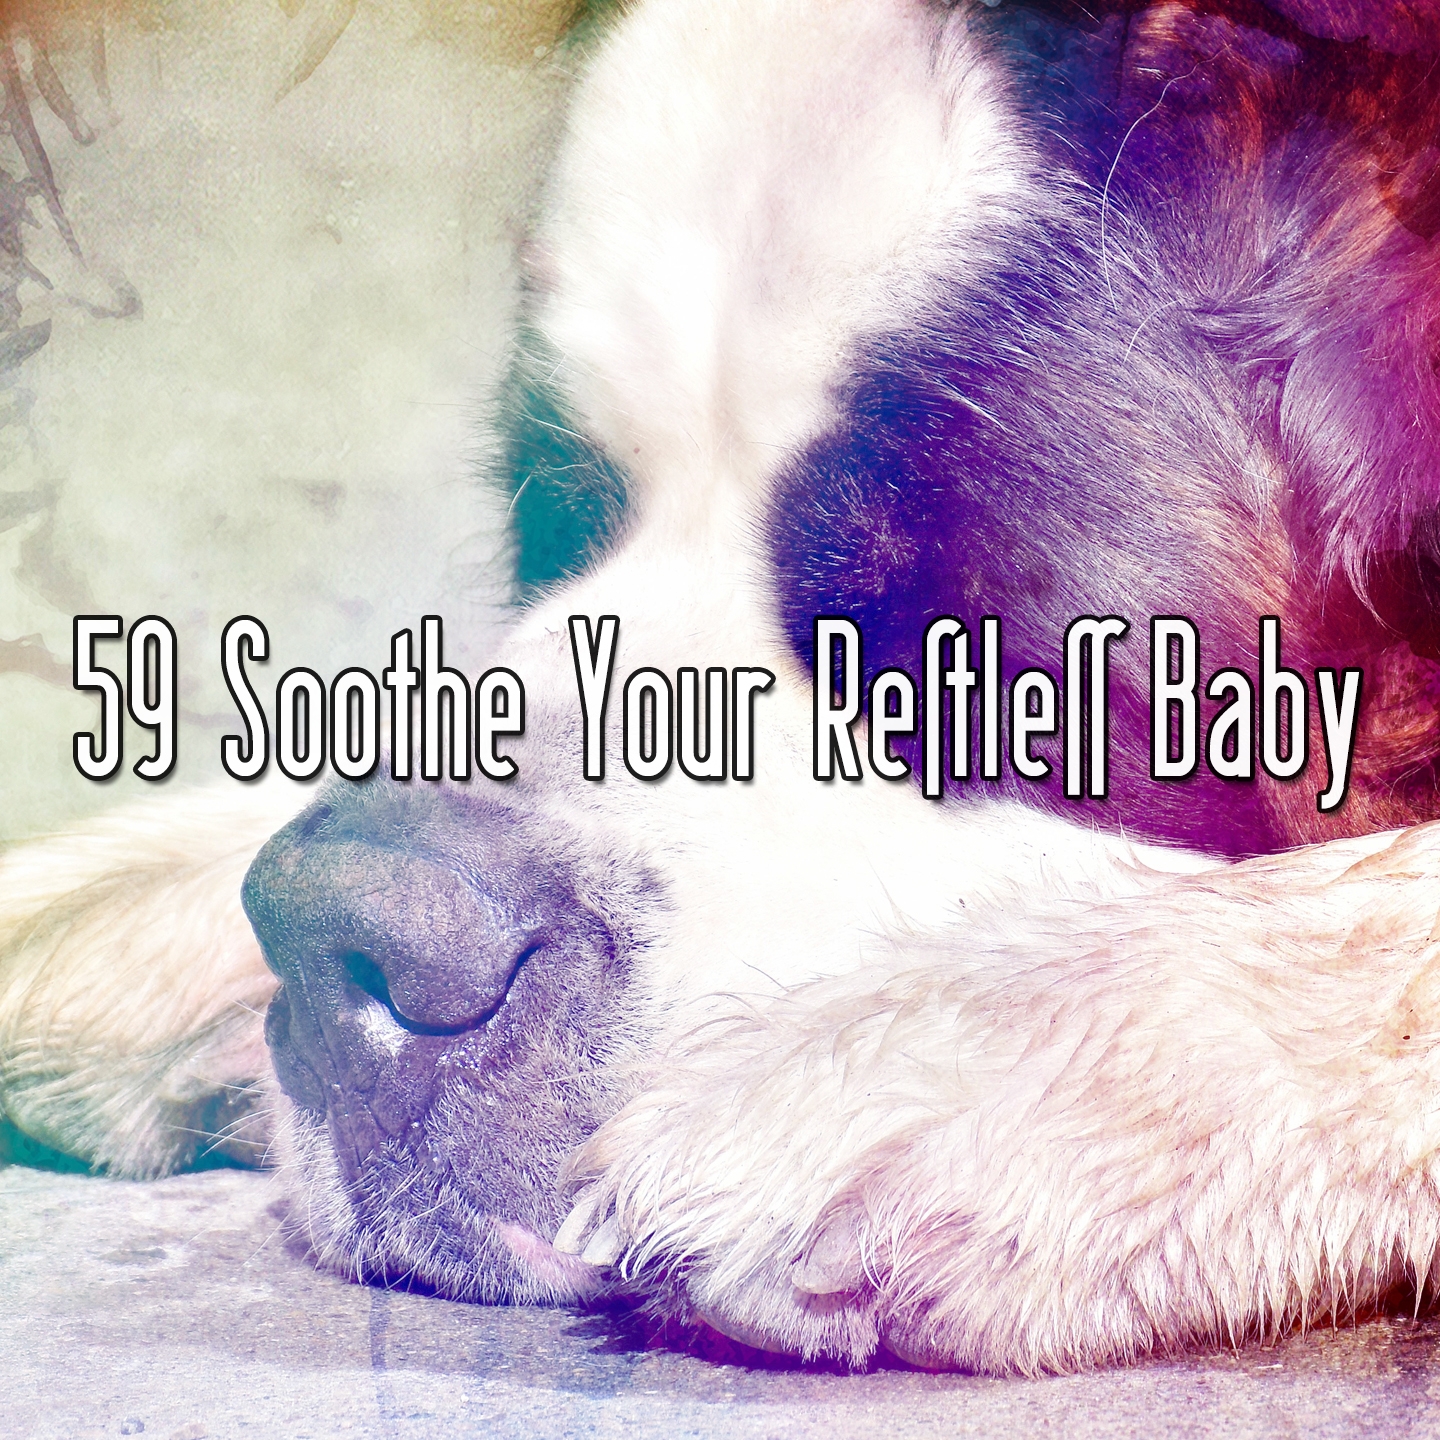 59 Soothe Your Restless Baby